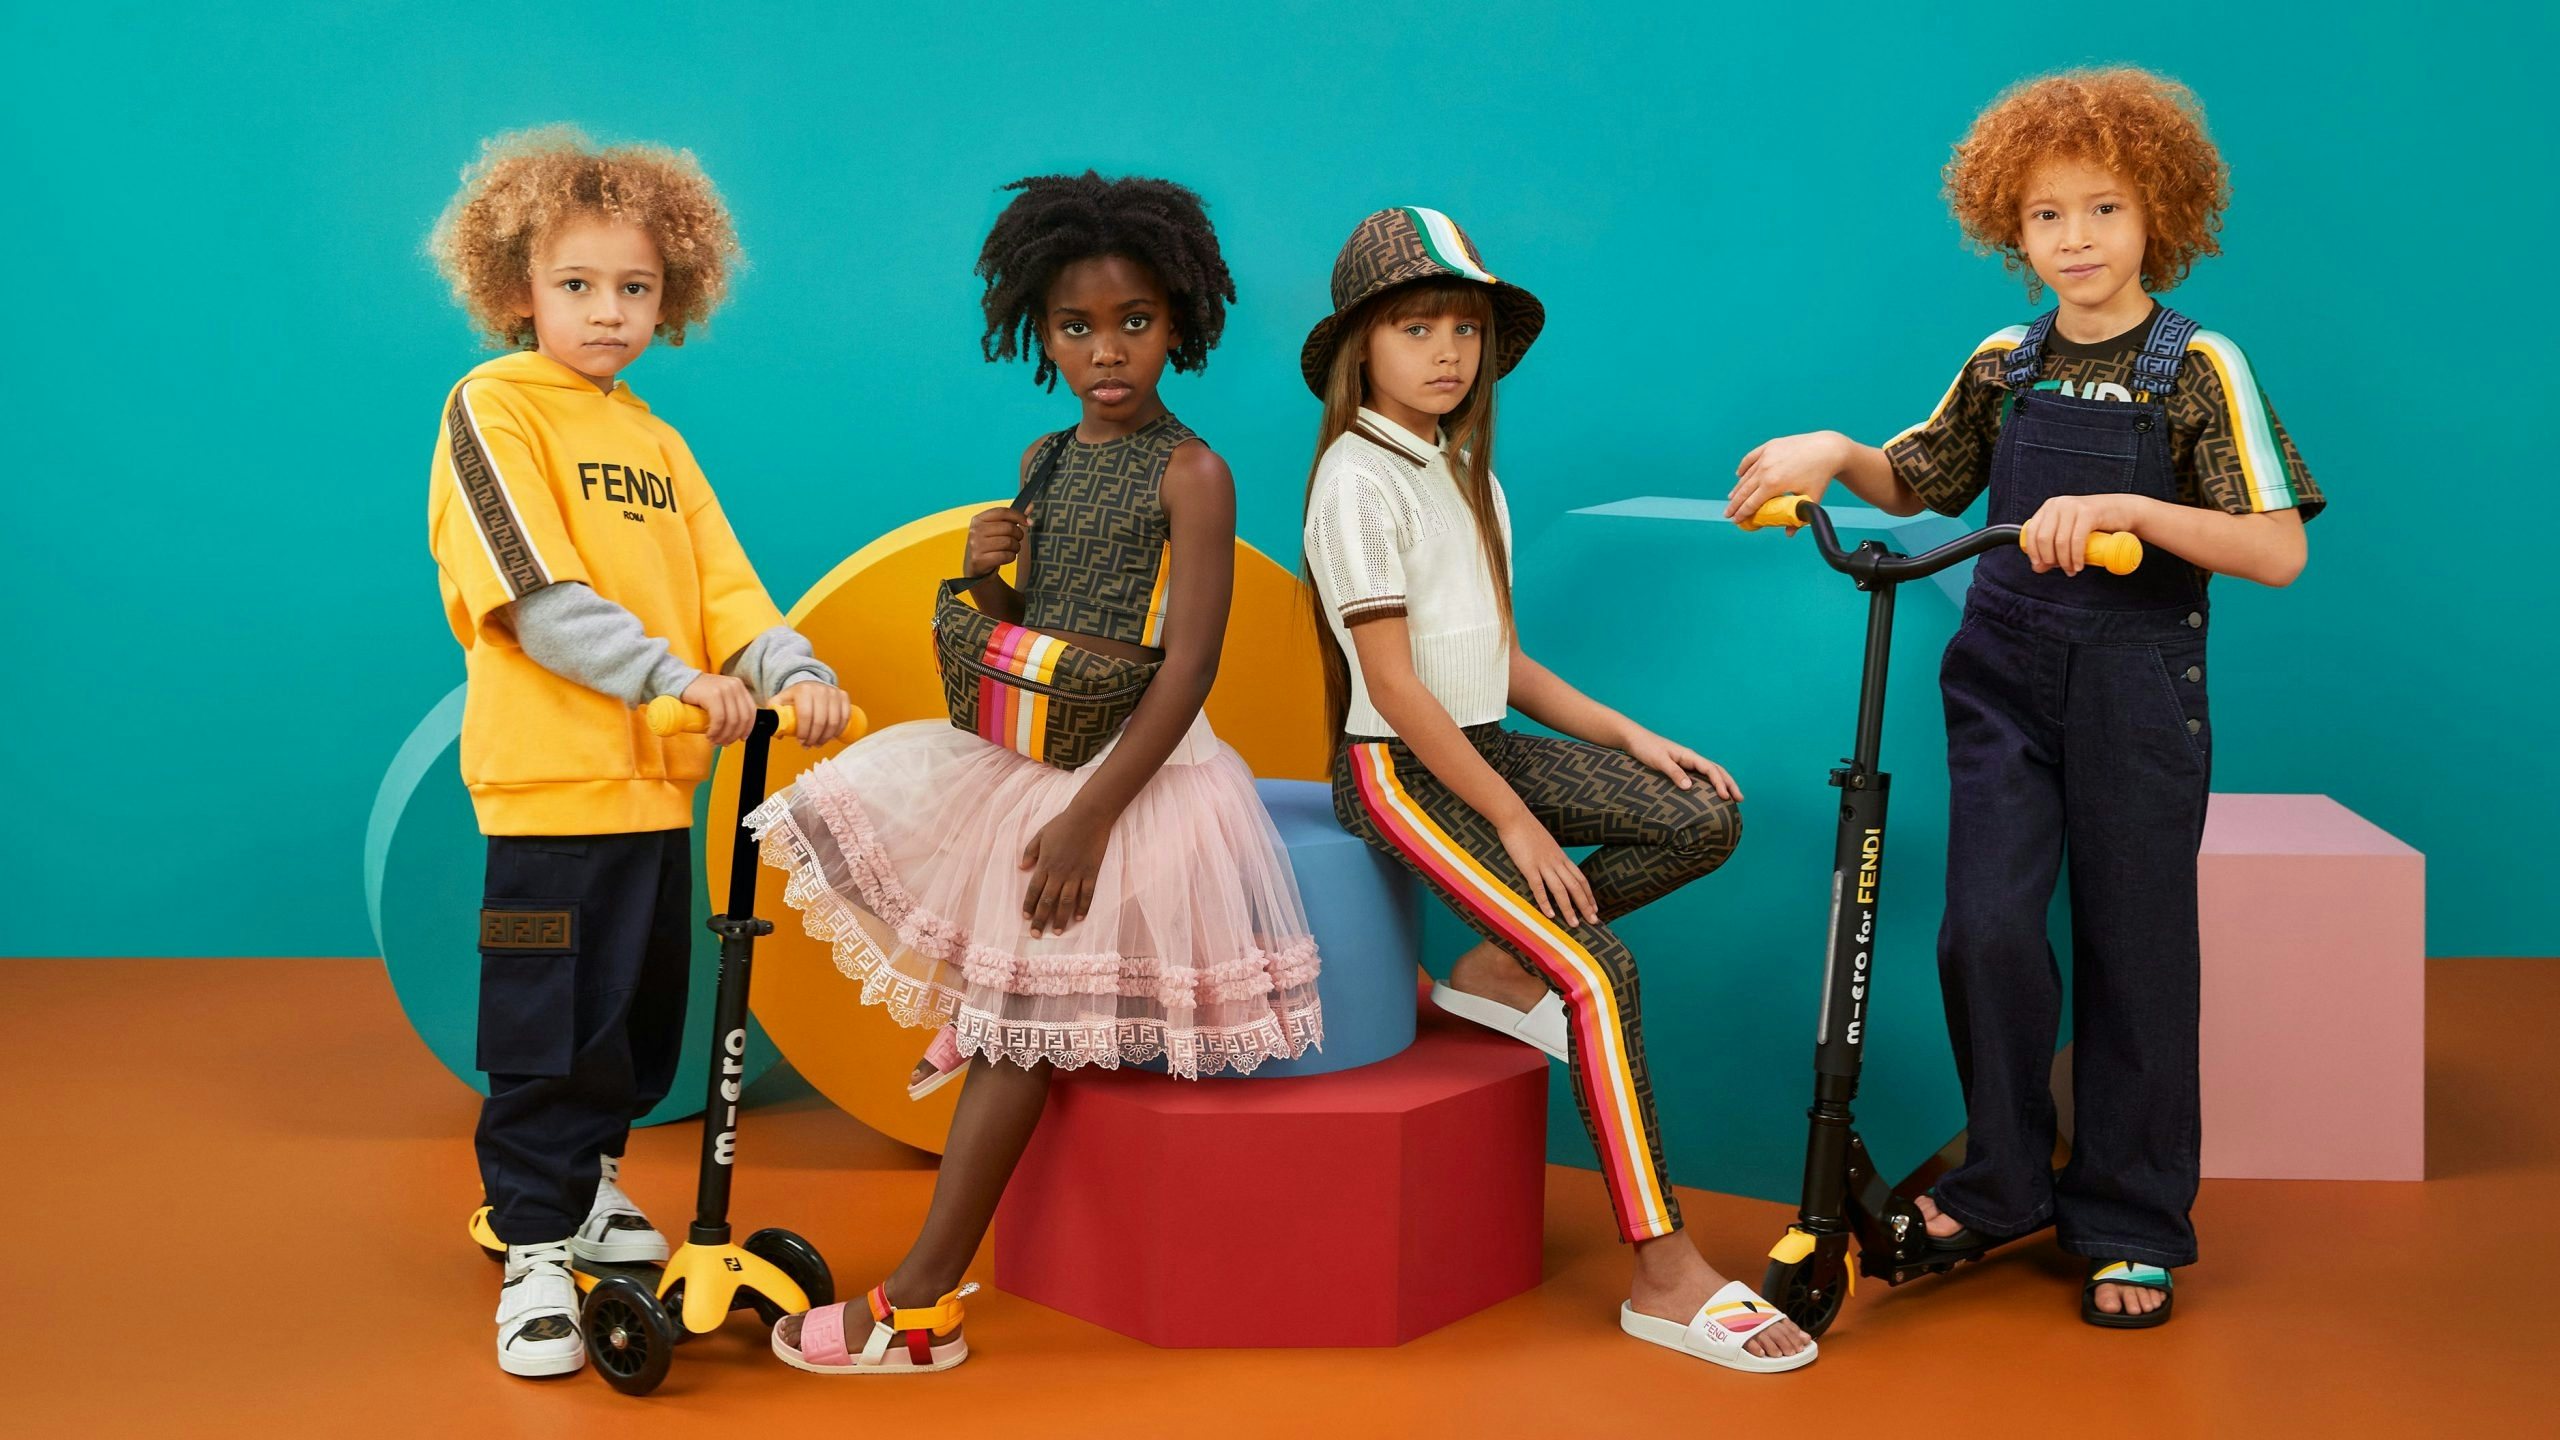 Can luxury turn the heads of China’s millennial parents or is it down to local brands to dress their little princes and princesses? Photo: Courtesy of Fendi